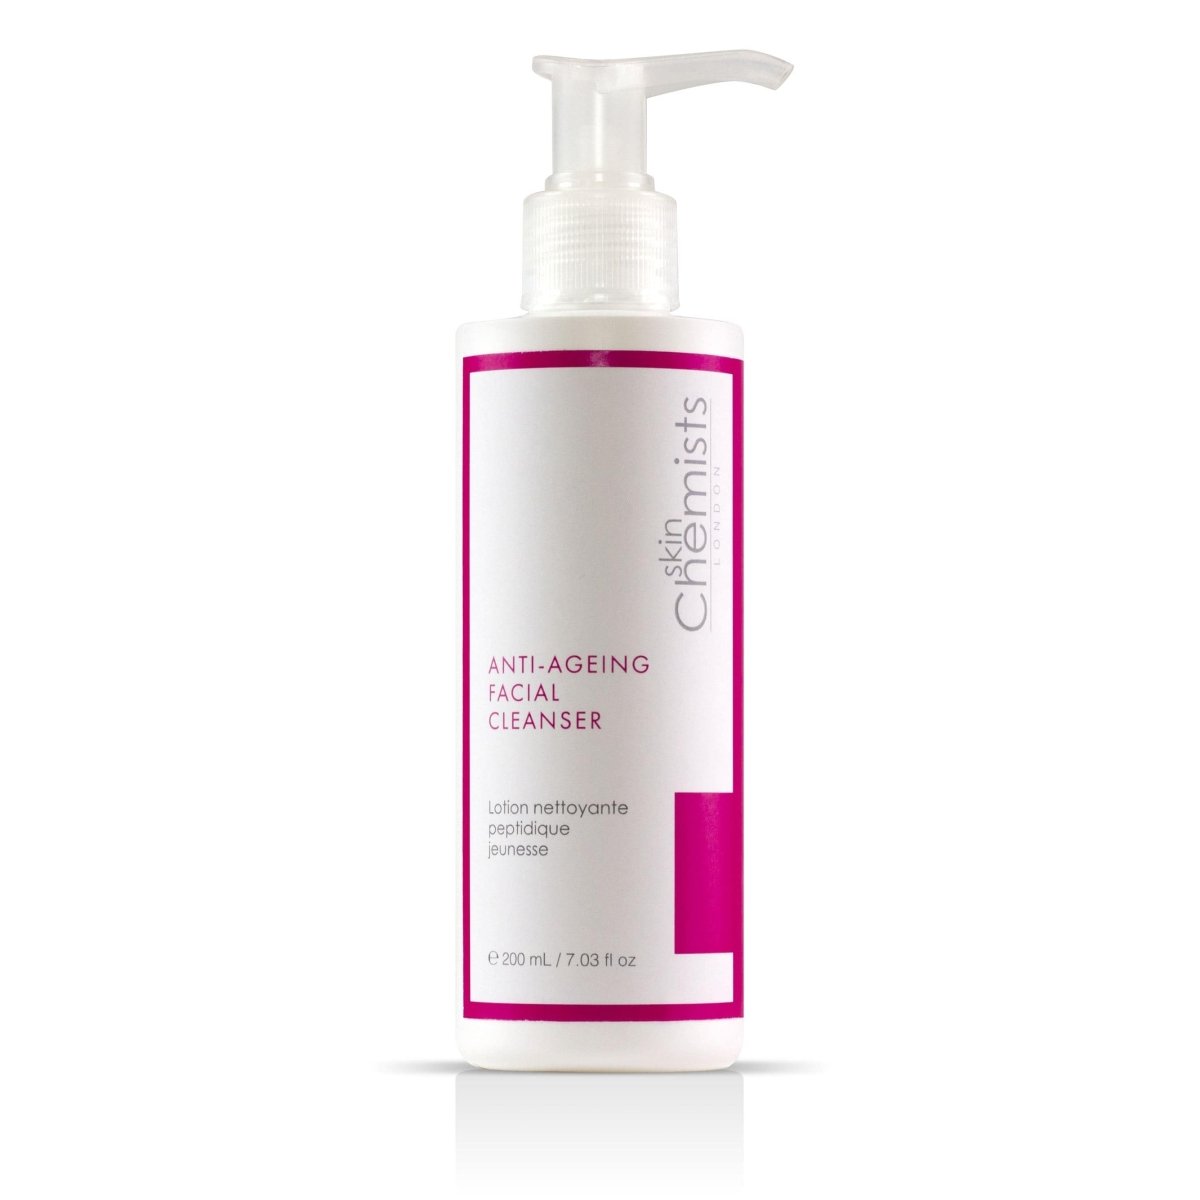 Anti - Ageing Facial Cleanser 200ml - skinChemists